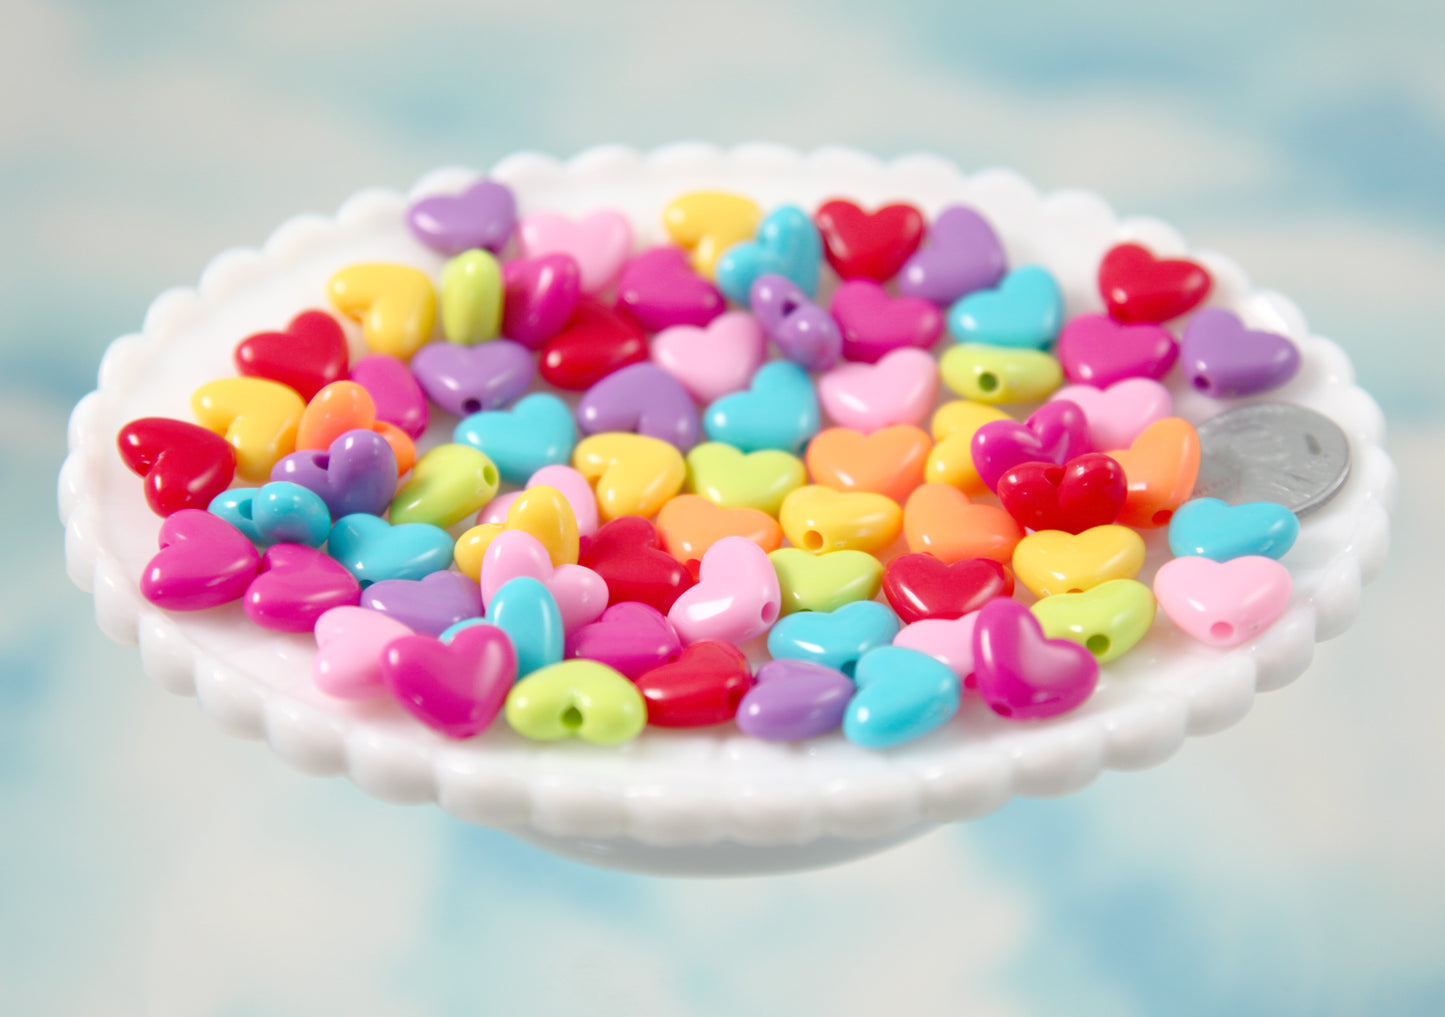 Plastic Heart Beads - 12mm Small Flat Bright Color Plastic Pastel Heart Resin or Acrylic Beads - 80 pc set